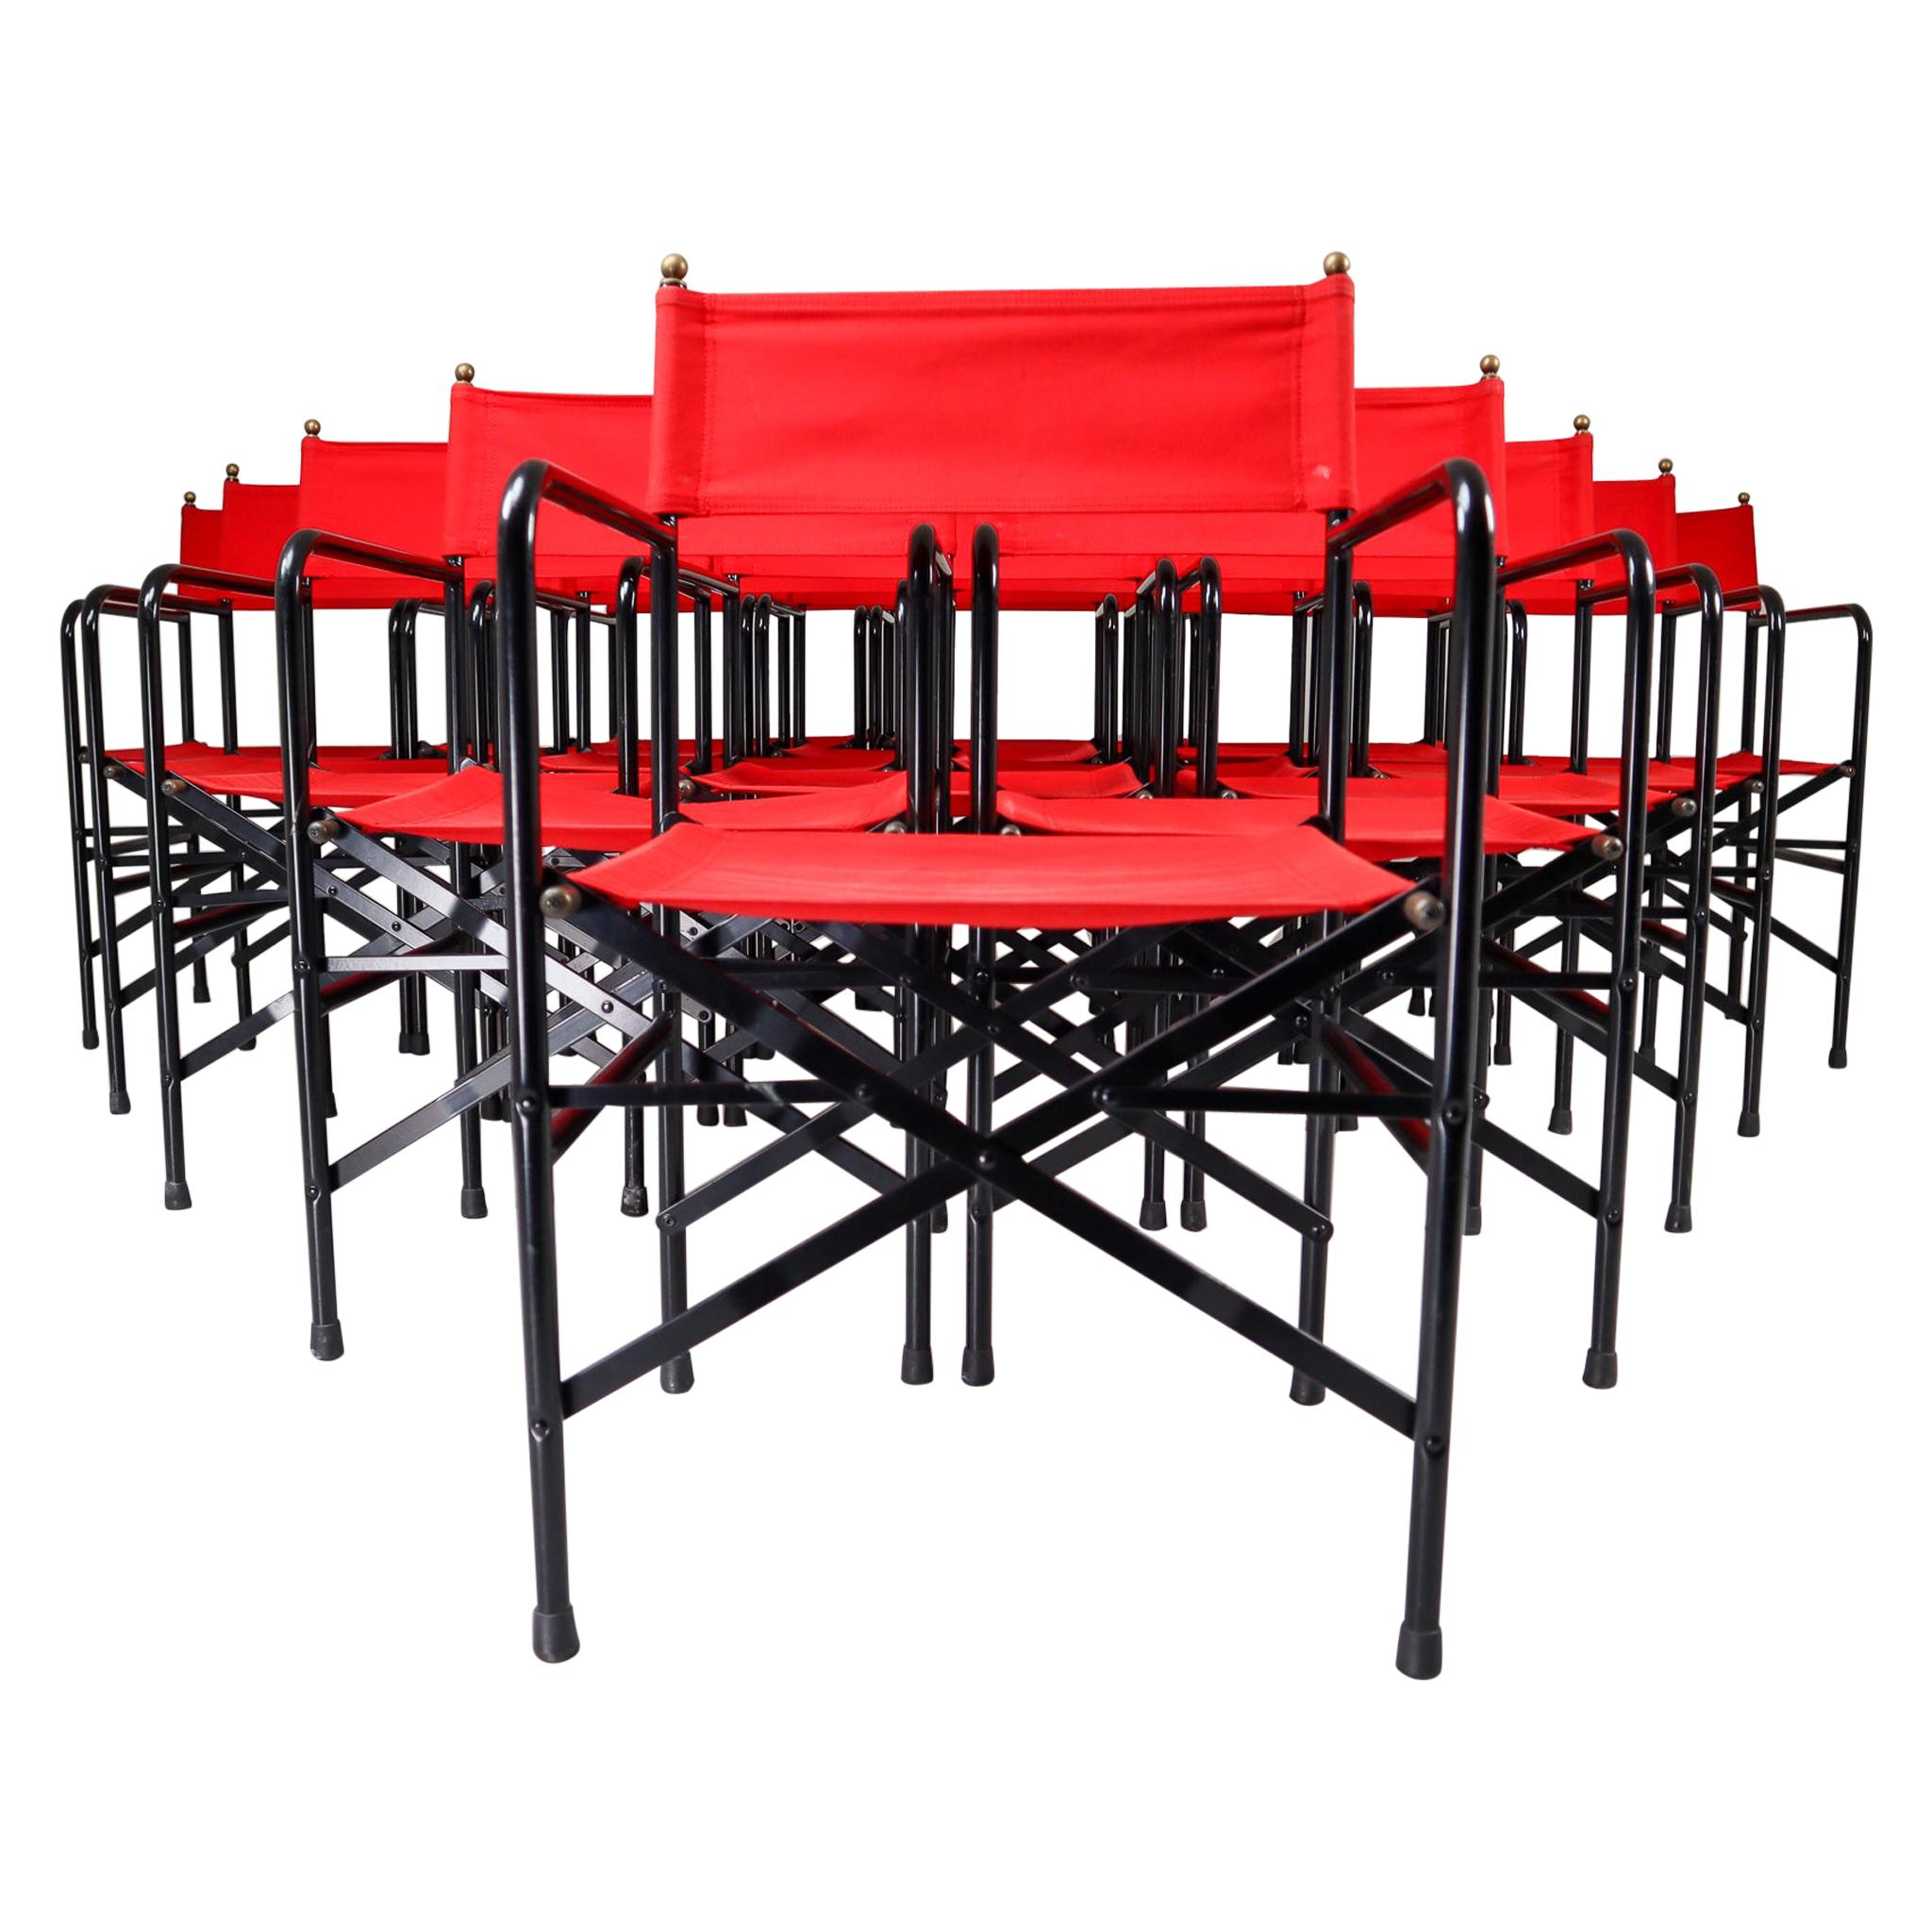 18 Venetian Folding-Patio-Garden Chairs in Steel, Brass and Red Fabric, 1980s